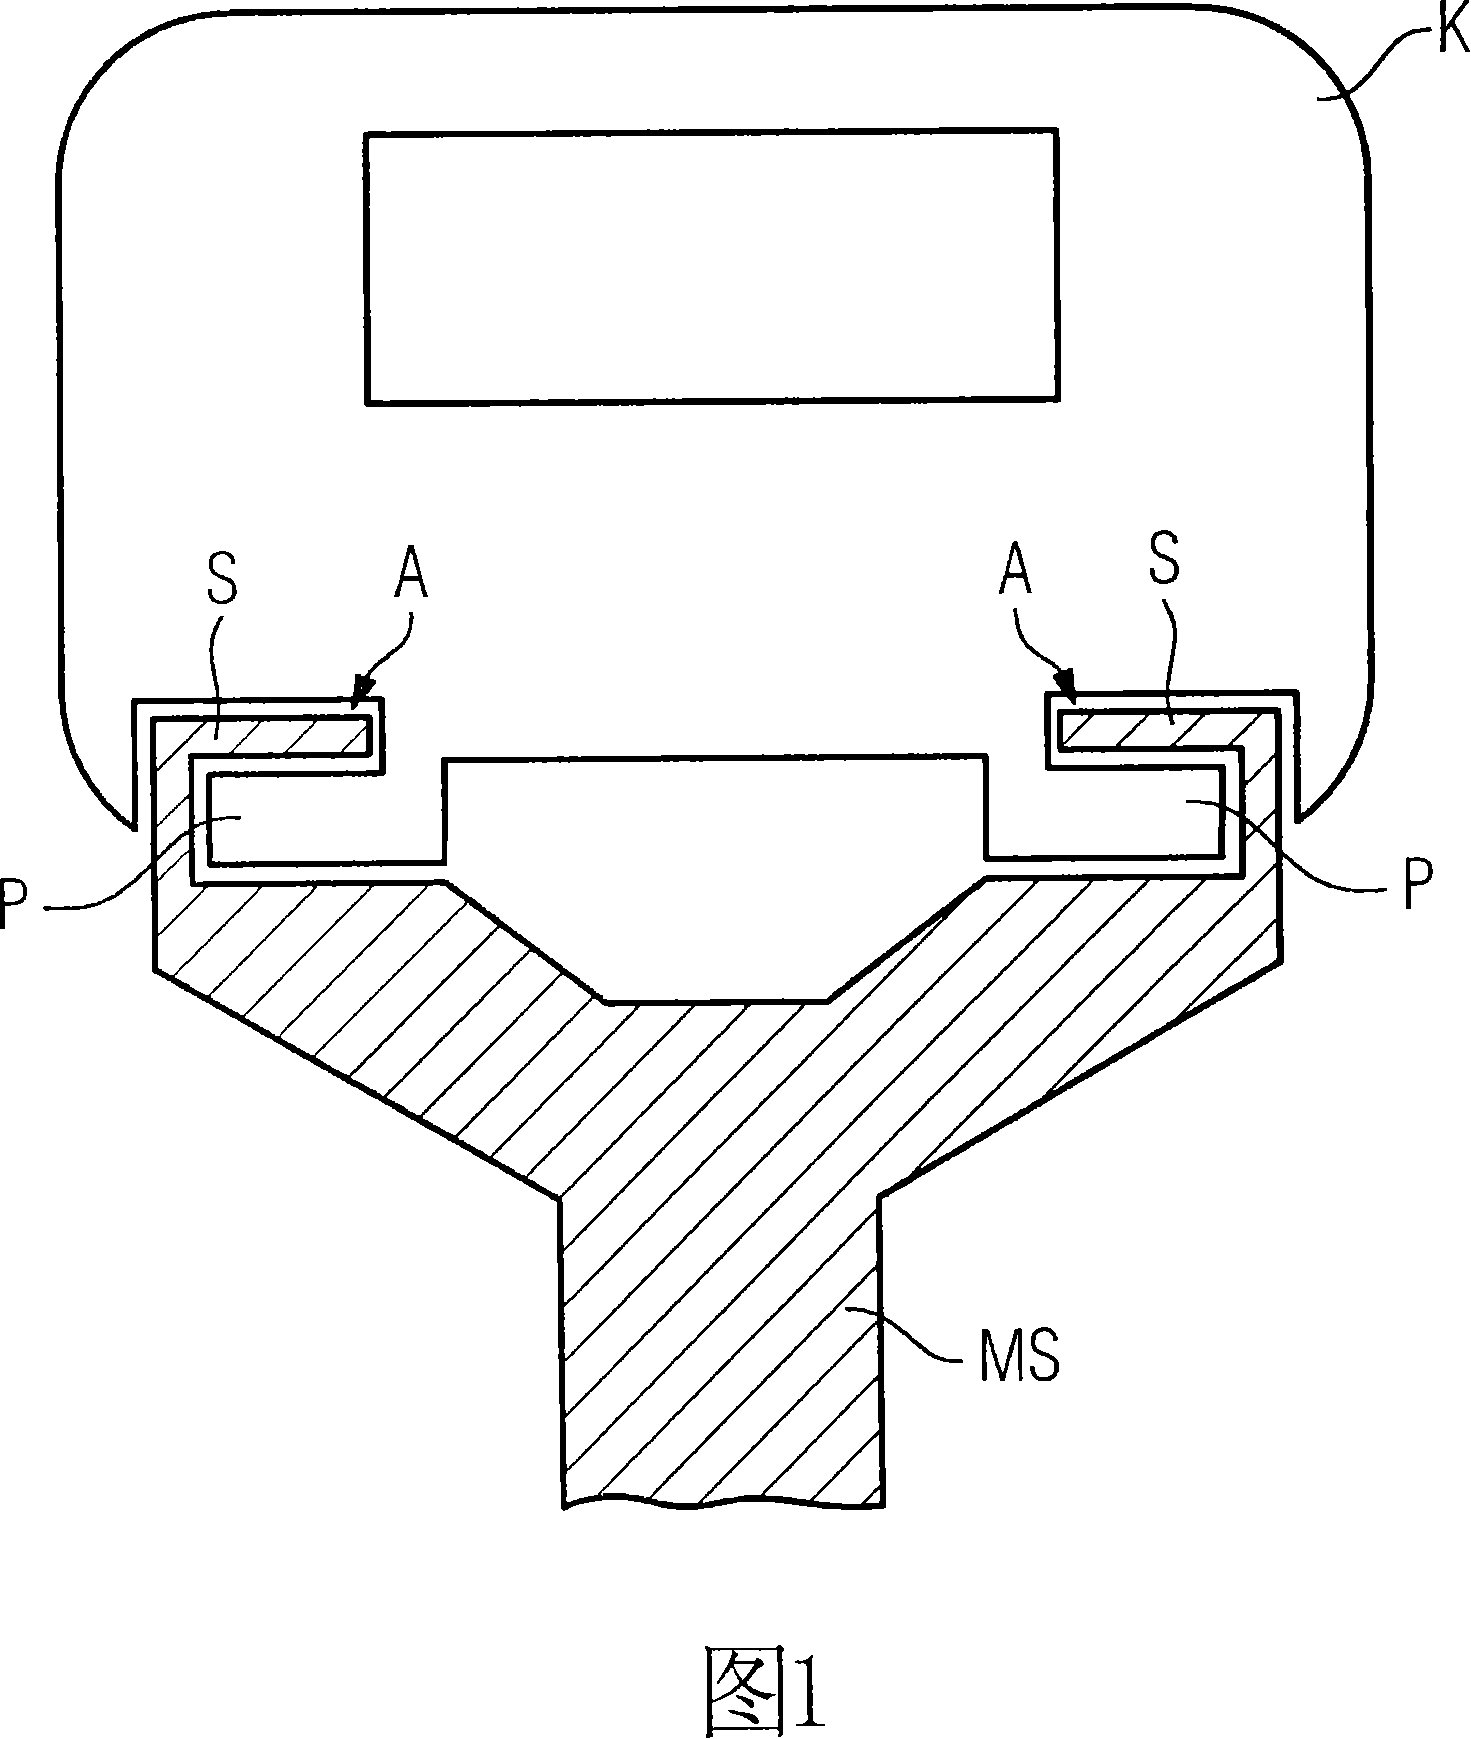 Person conveying system comprising a synchronous linear motor